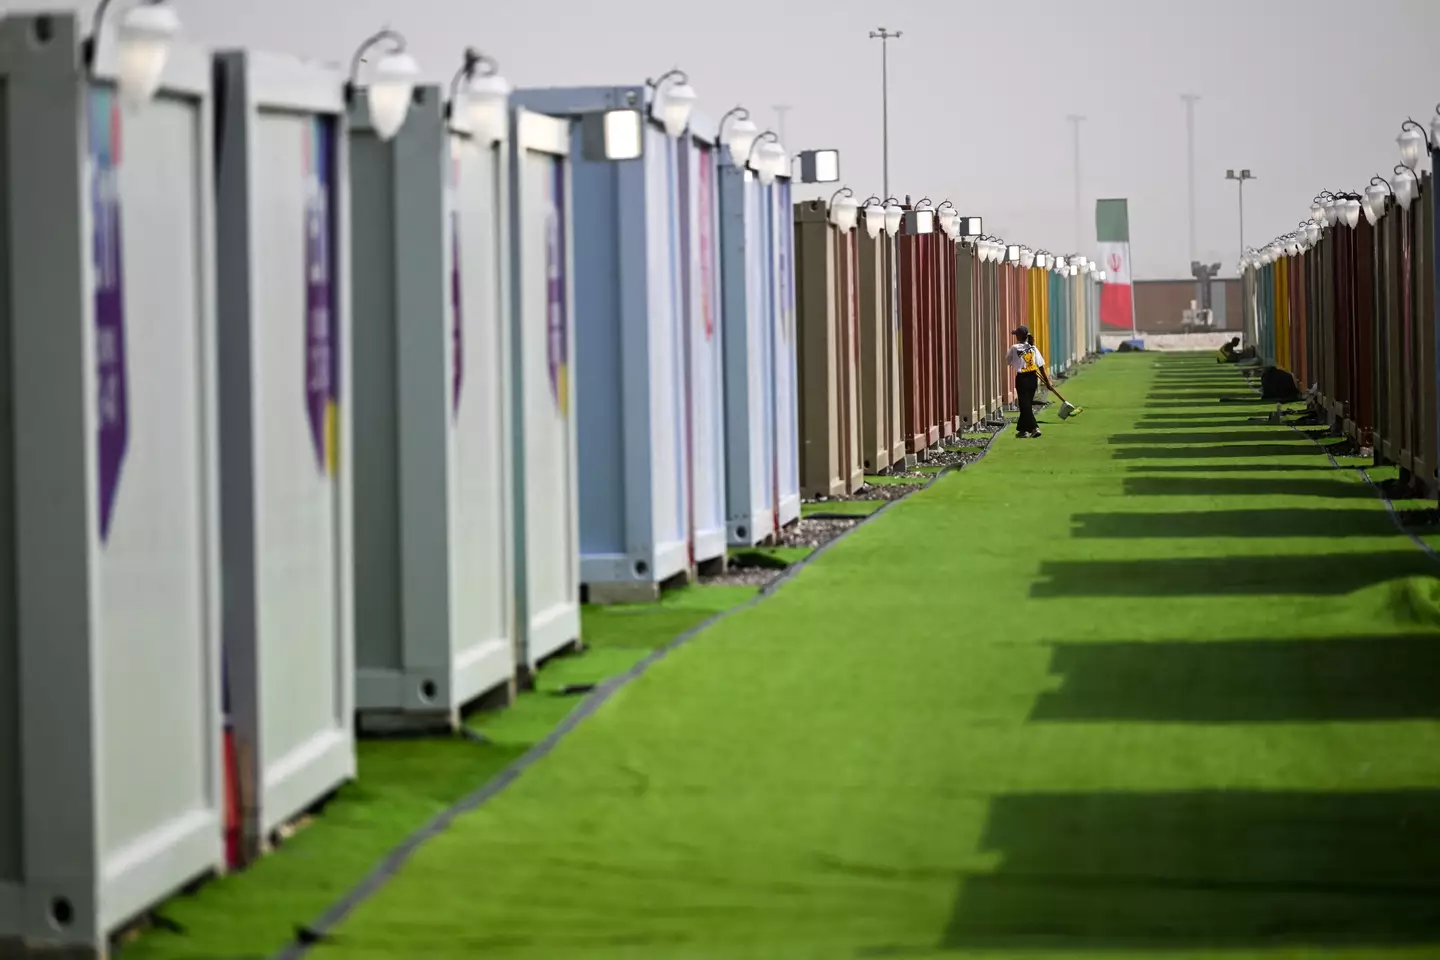 Fans who have forked out will essentially be living in metal boxes... in the middle of the desert.